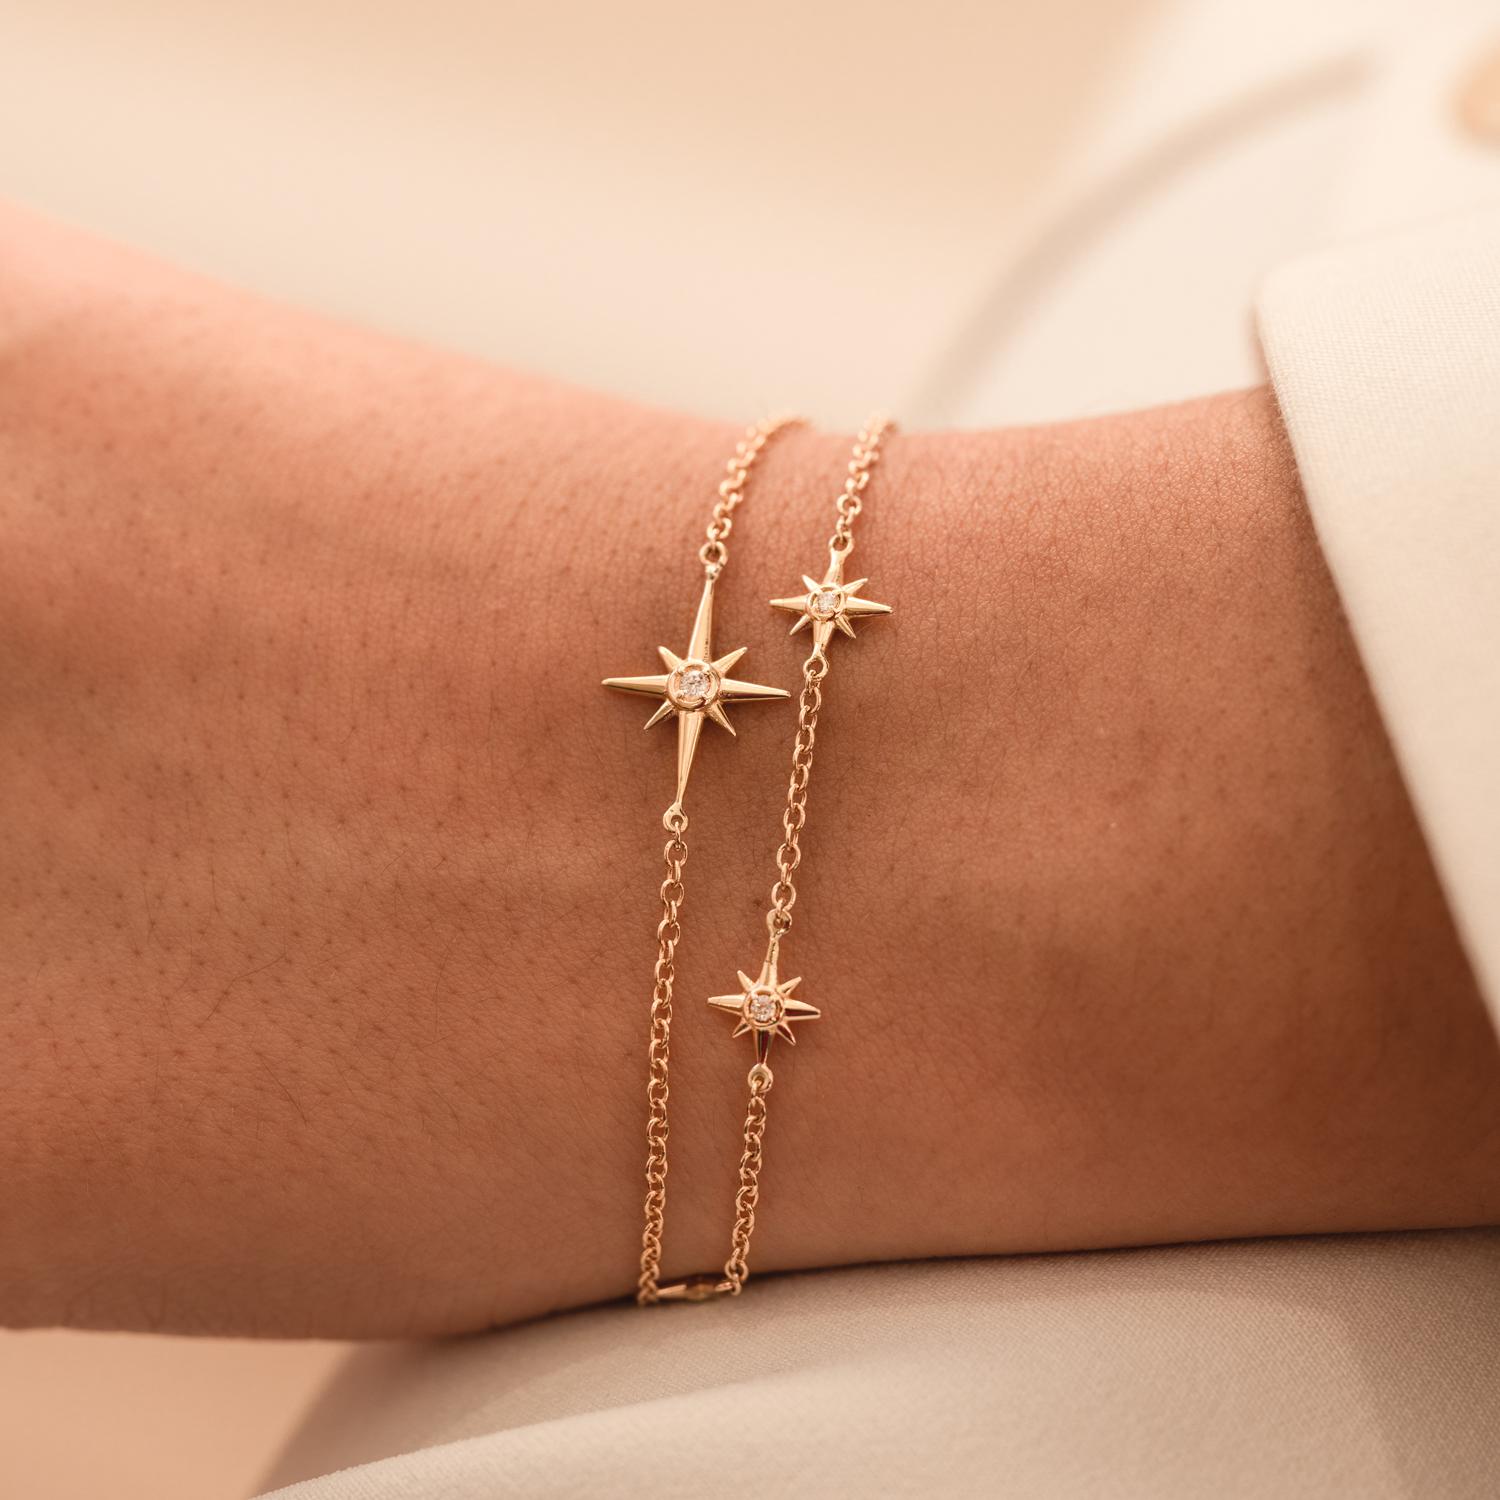 Our fine North Star range is a new collection of 14k Gold and Diamond guiding stars inspired by our ever-popular 'True North' Talisman designs.

This delicate 14k yellow gold bracelet features an elegant North Star with elongated rays and set with a